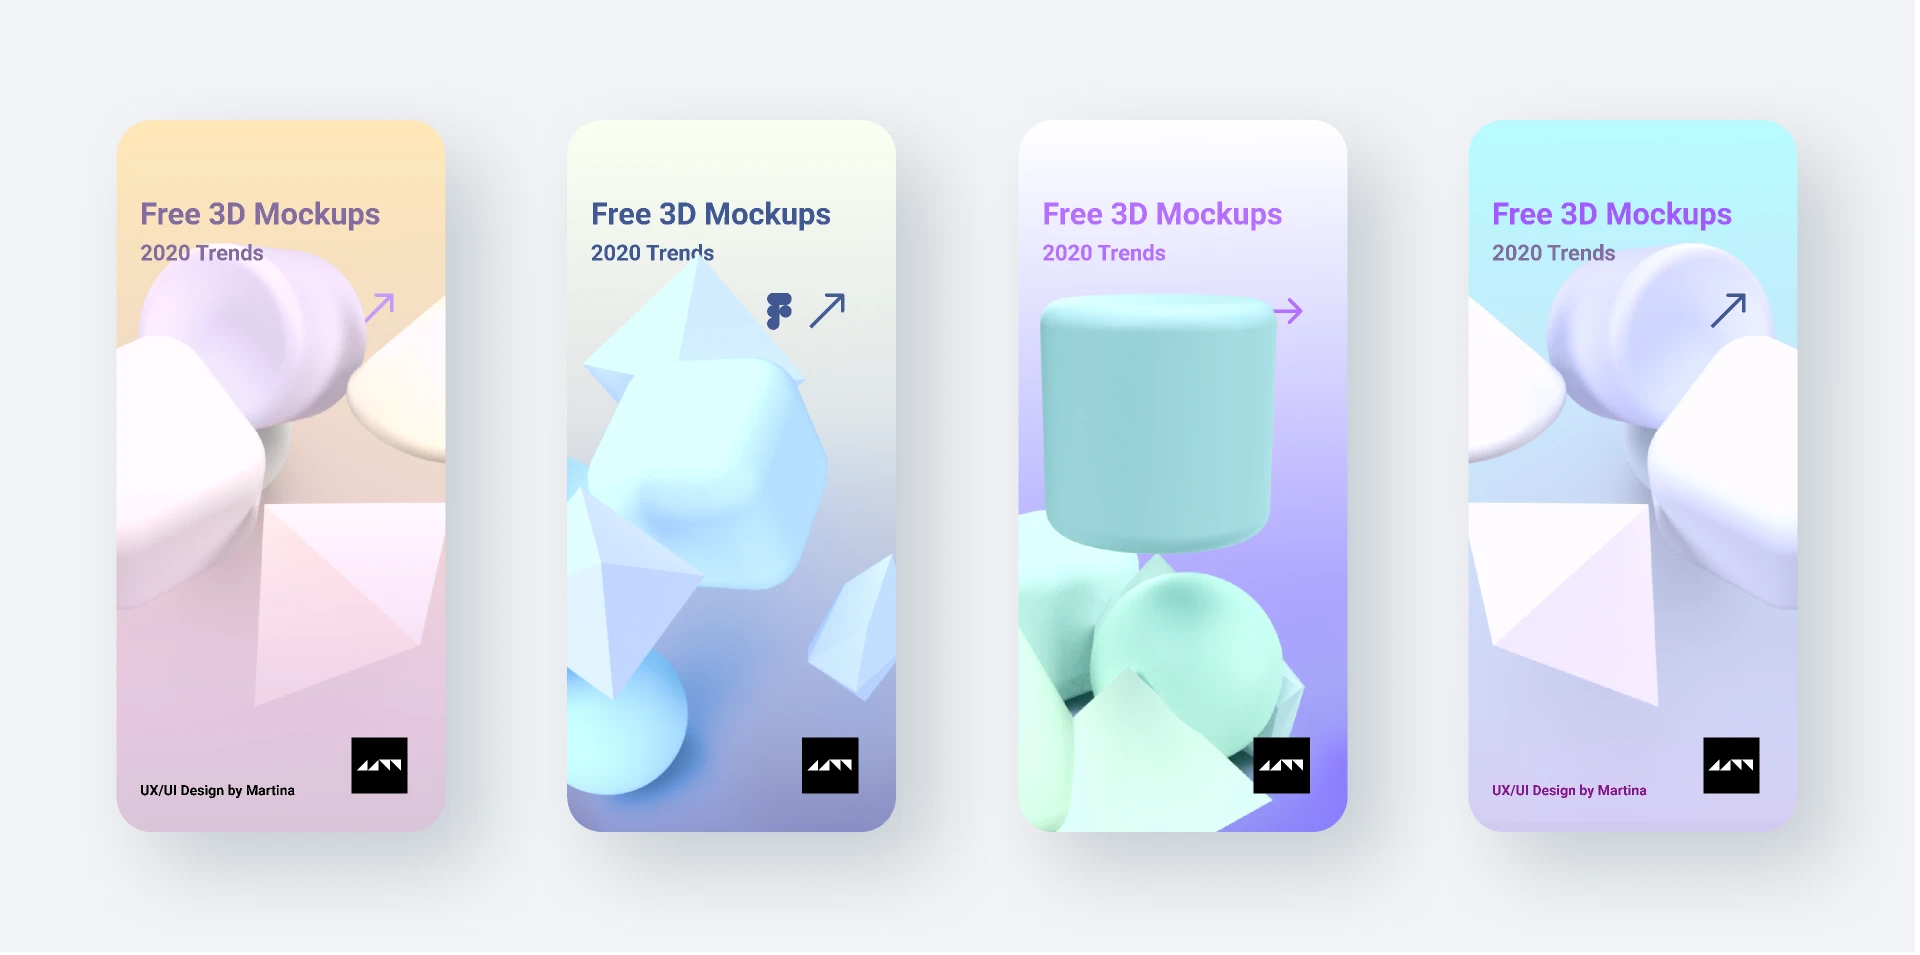 3D models for Figma and Adobe XD